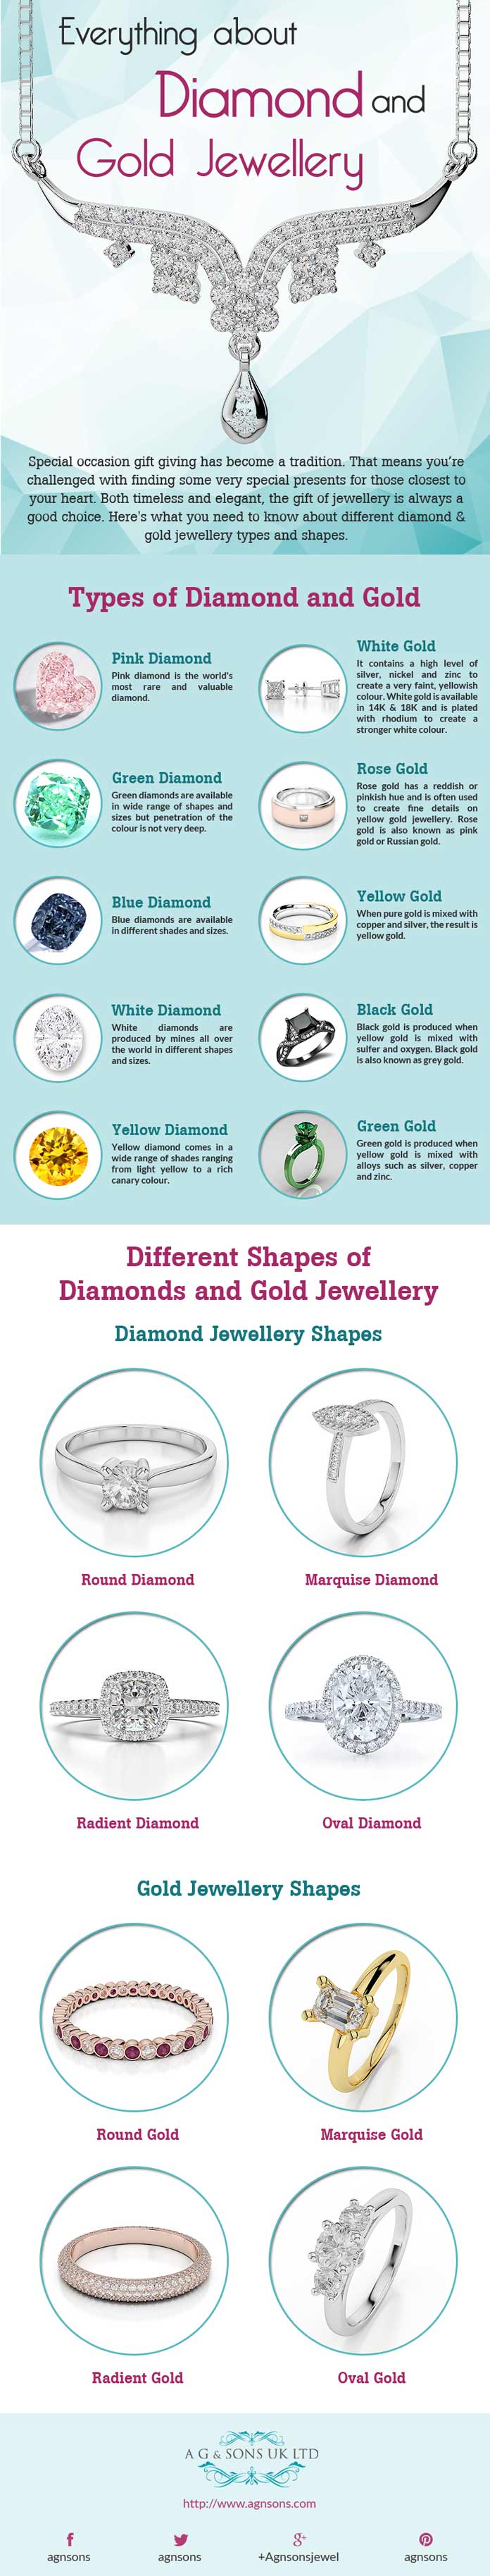 everything-about-diamond-and-gold-jewellery